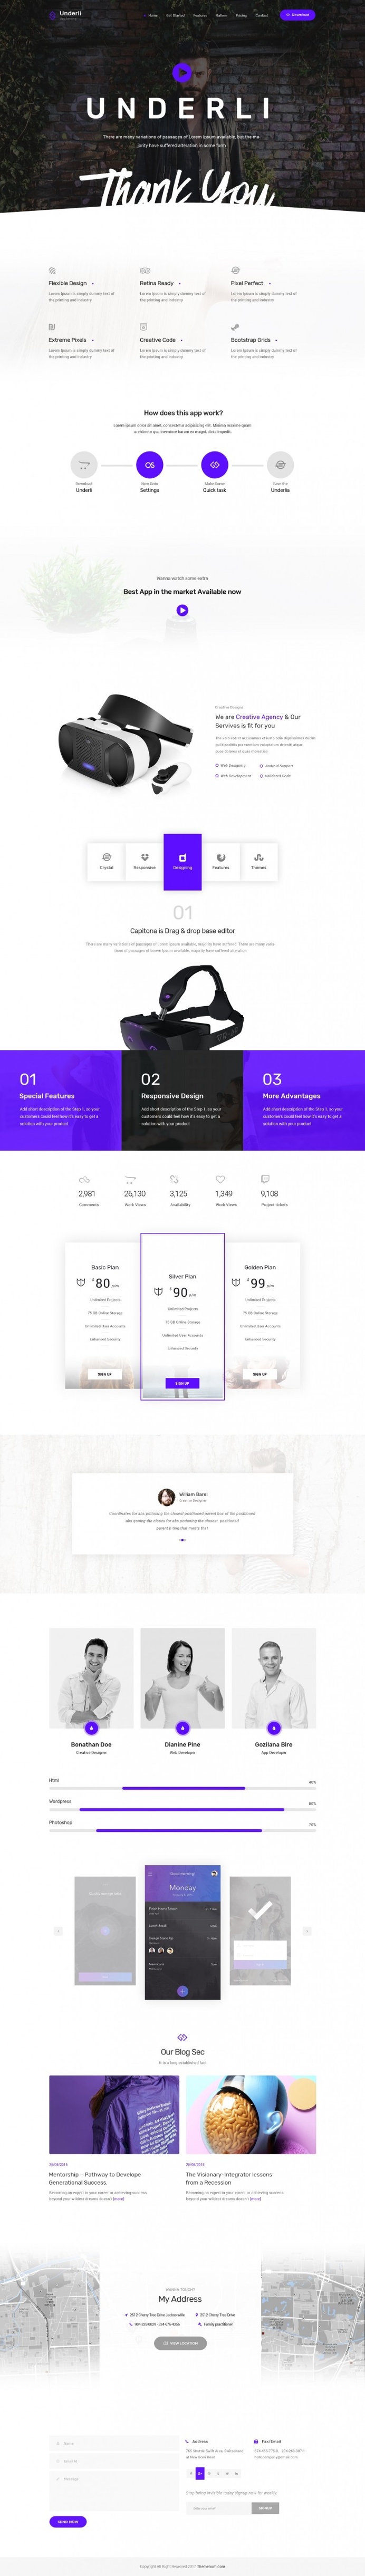 Product Page screen design idea #296: App Landing Page Product